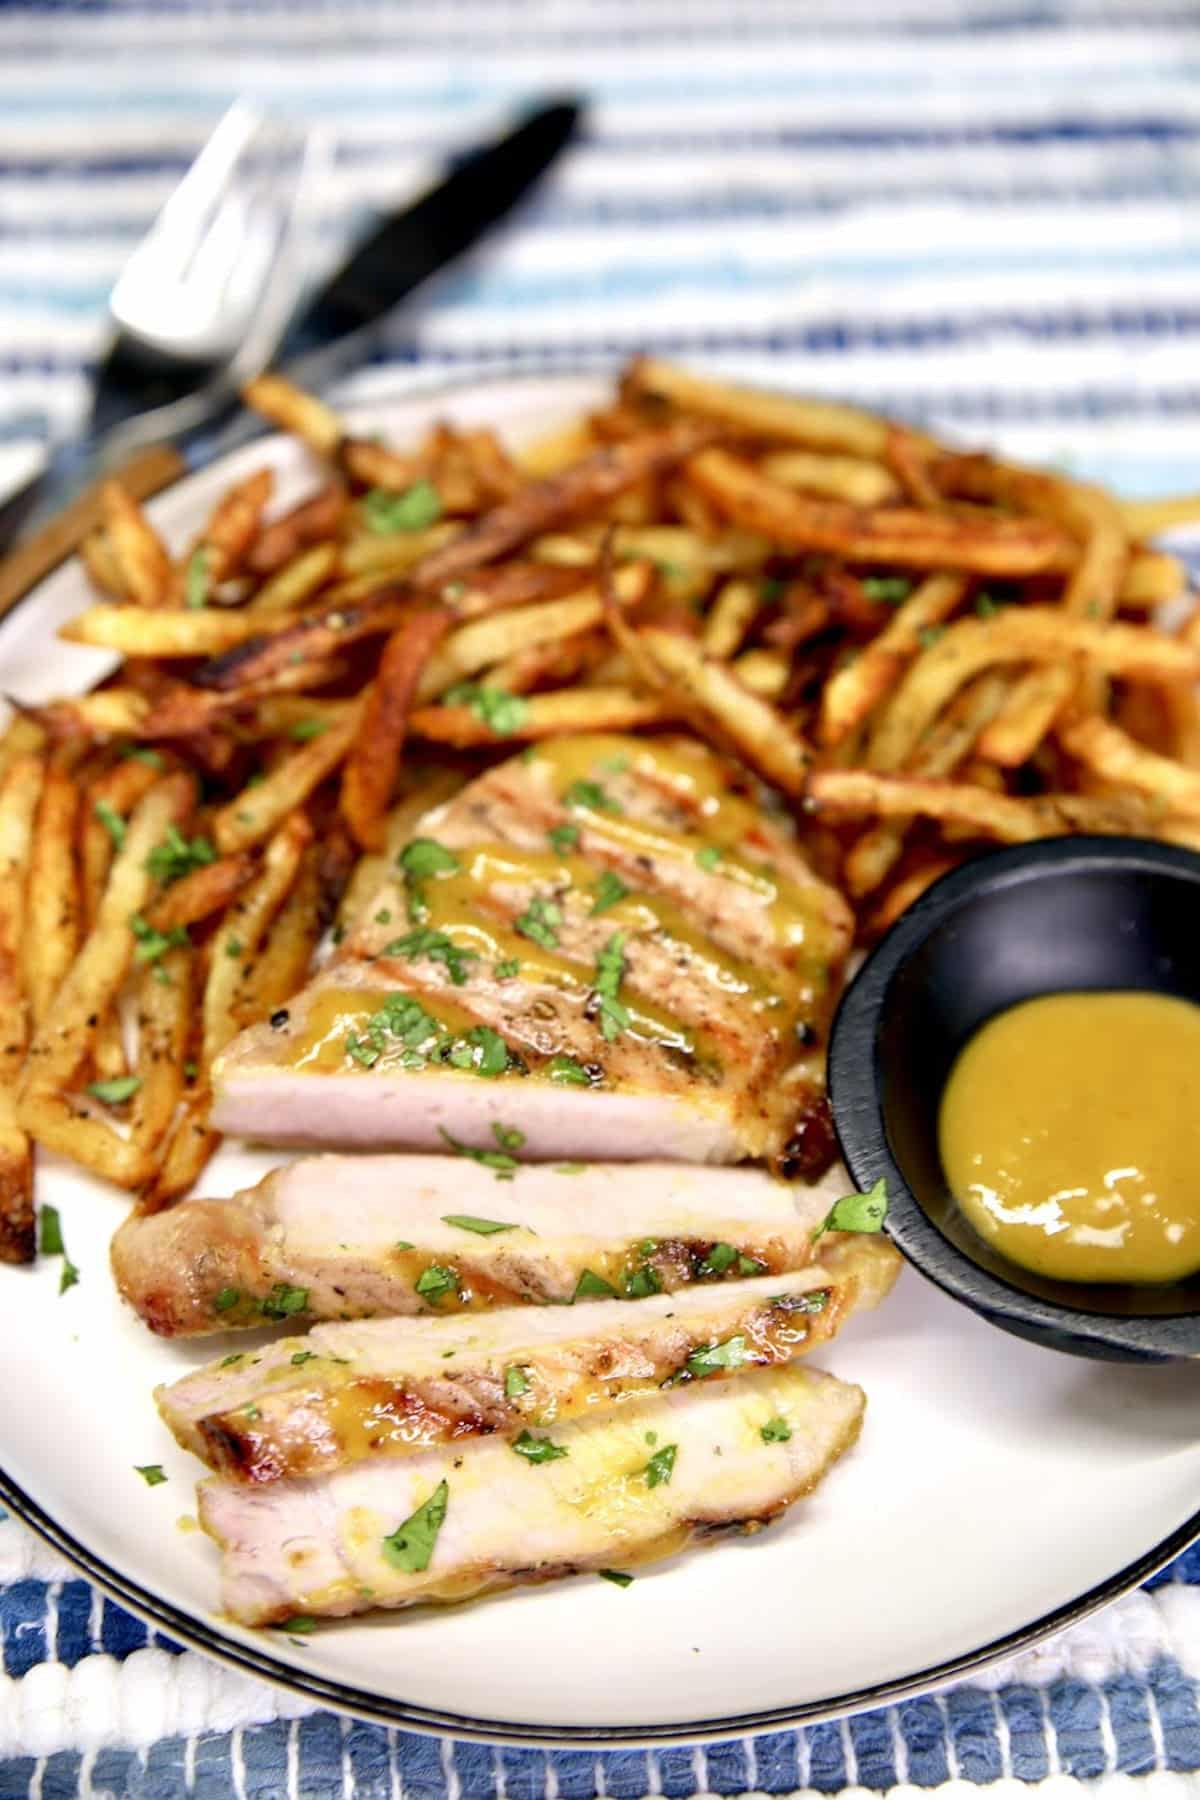 Mustard Pork Chop on a plate with fries.